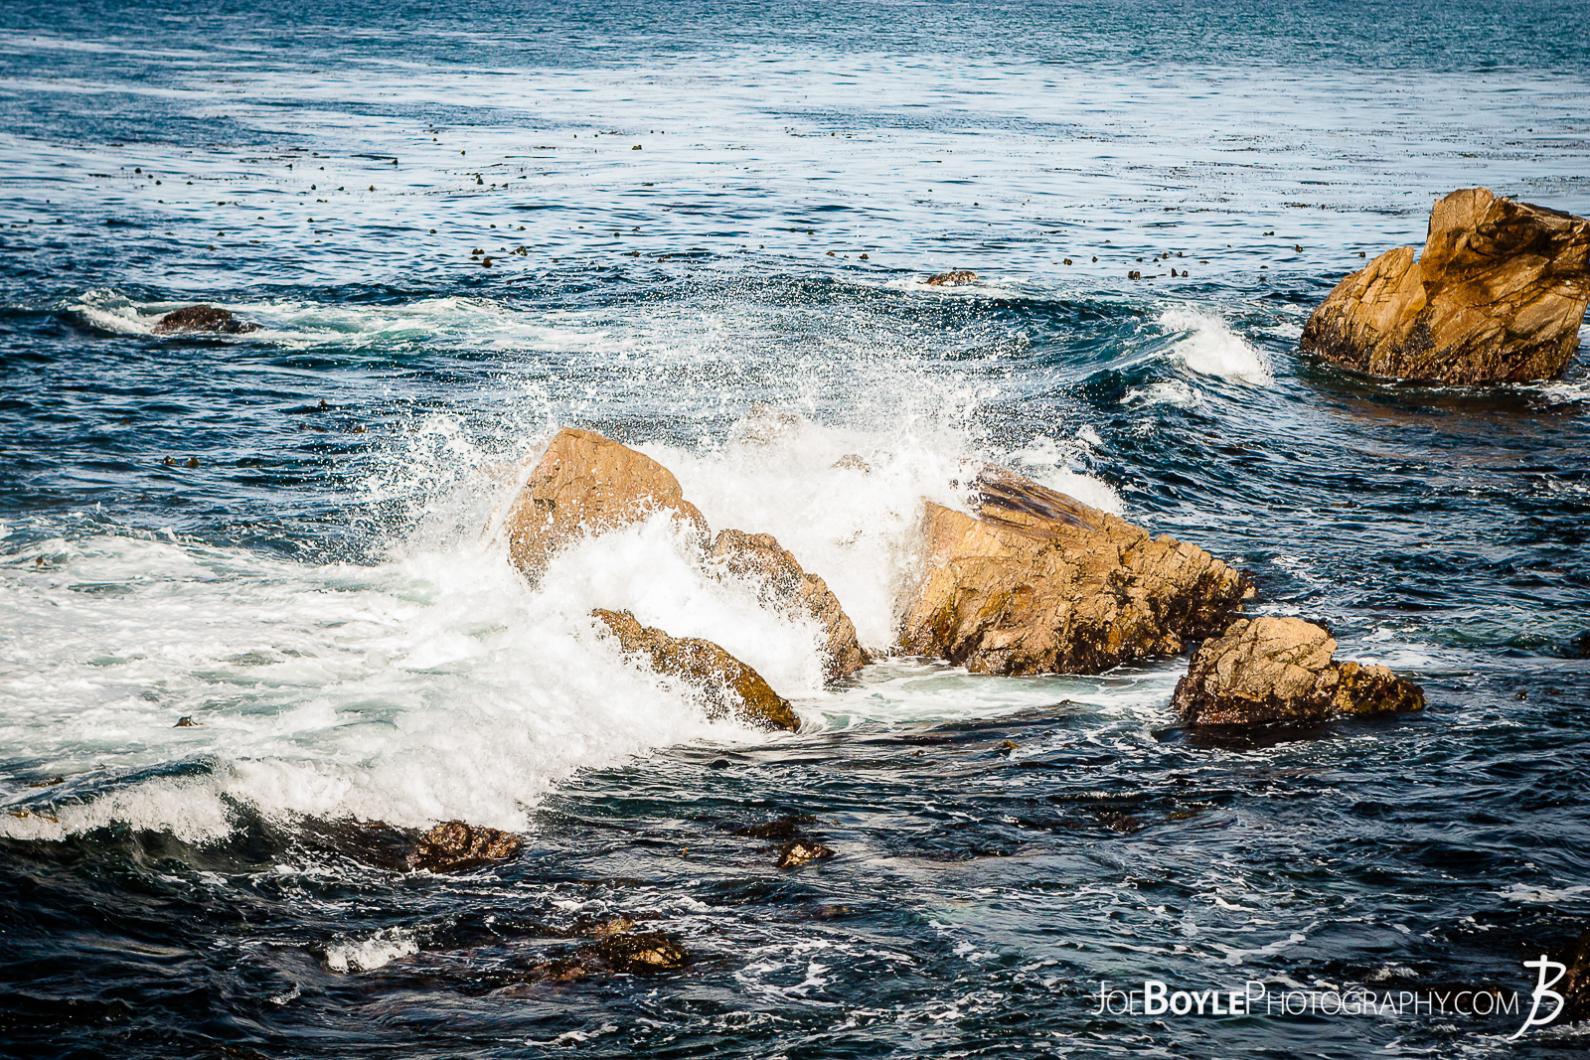 I was traveling down the 17 Mile drive to Carmel by the Sea with some friends and we made a couple pit stops along the way. This is a photo near the coast where the wind was picking up creating waves.